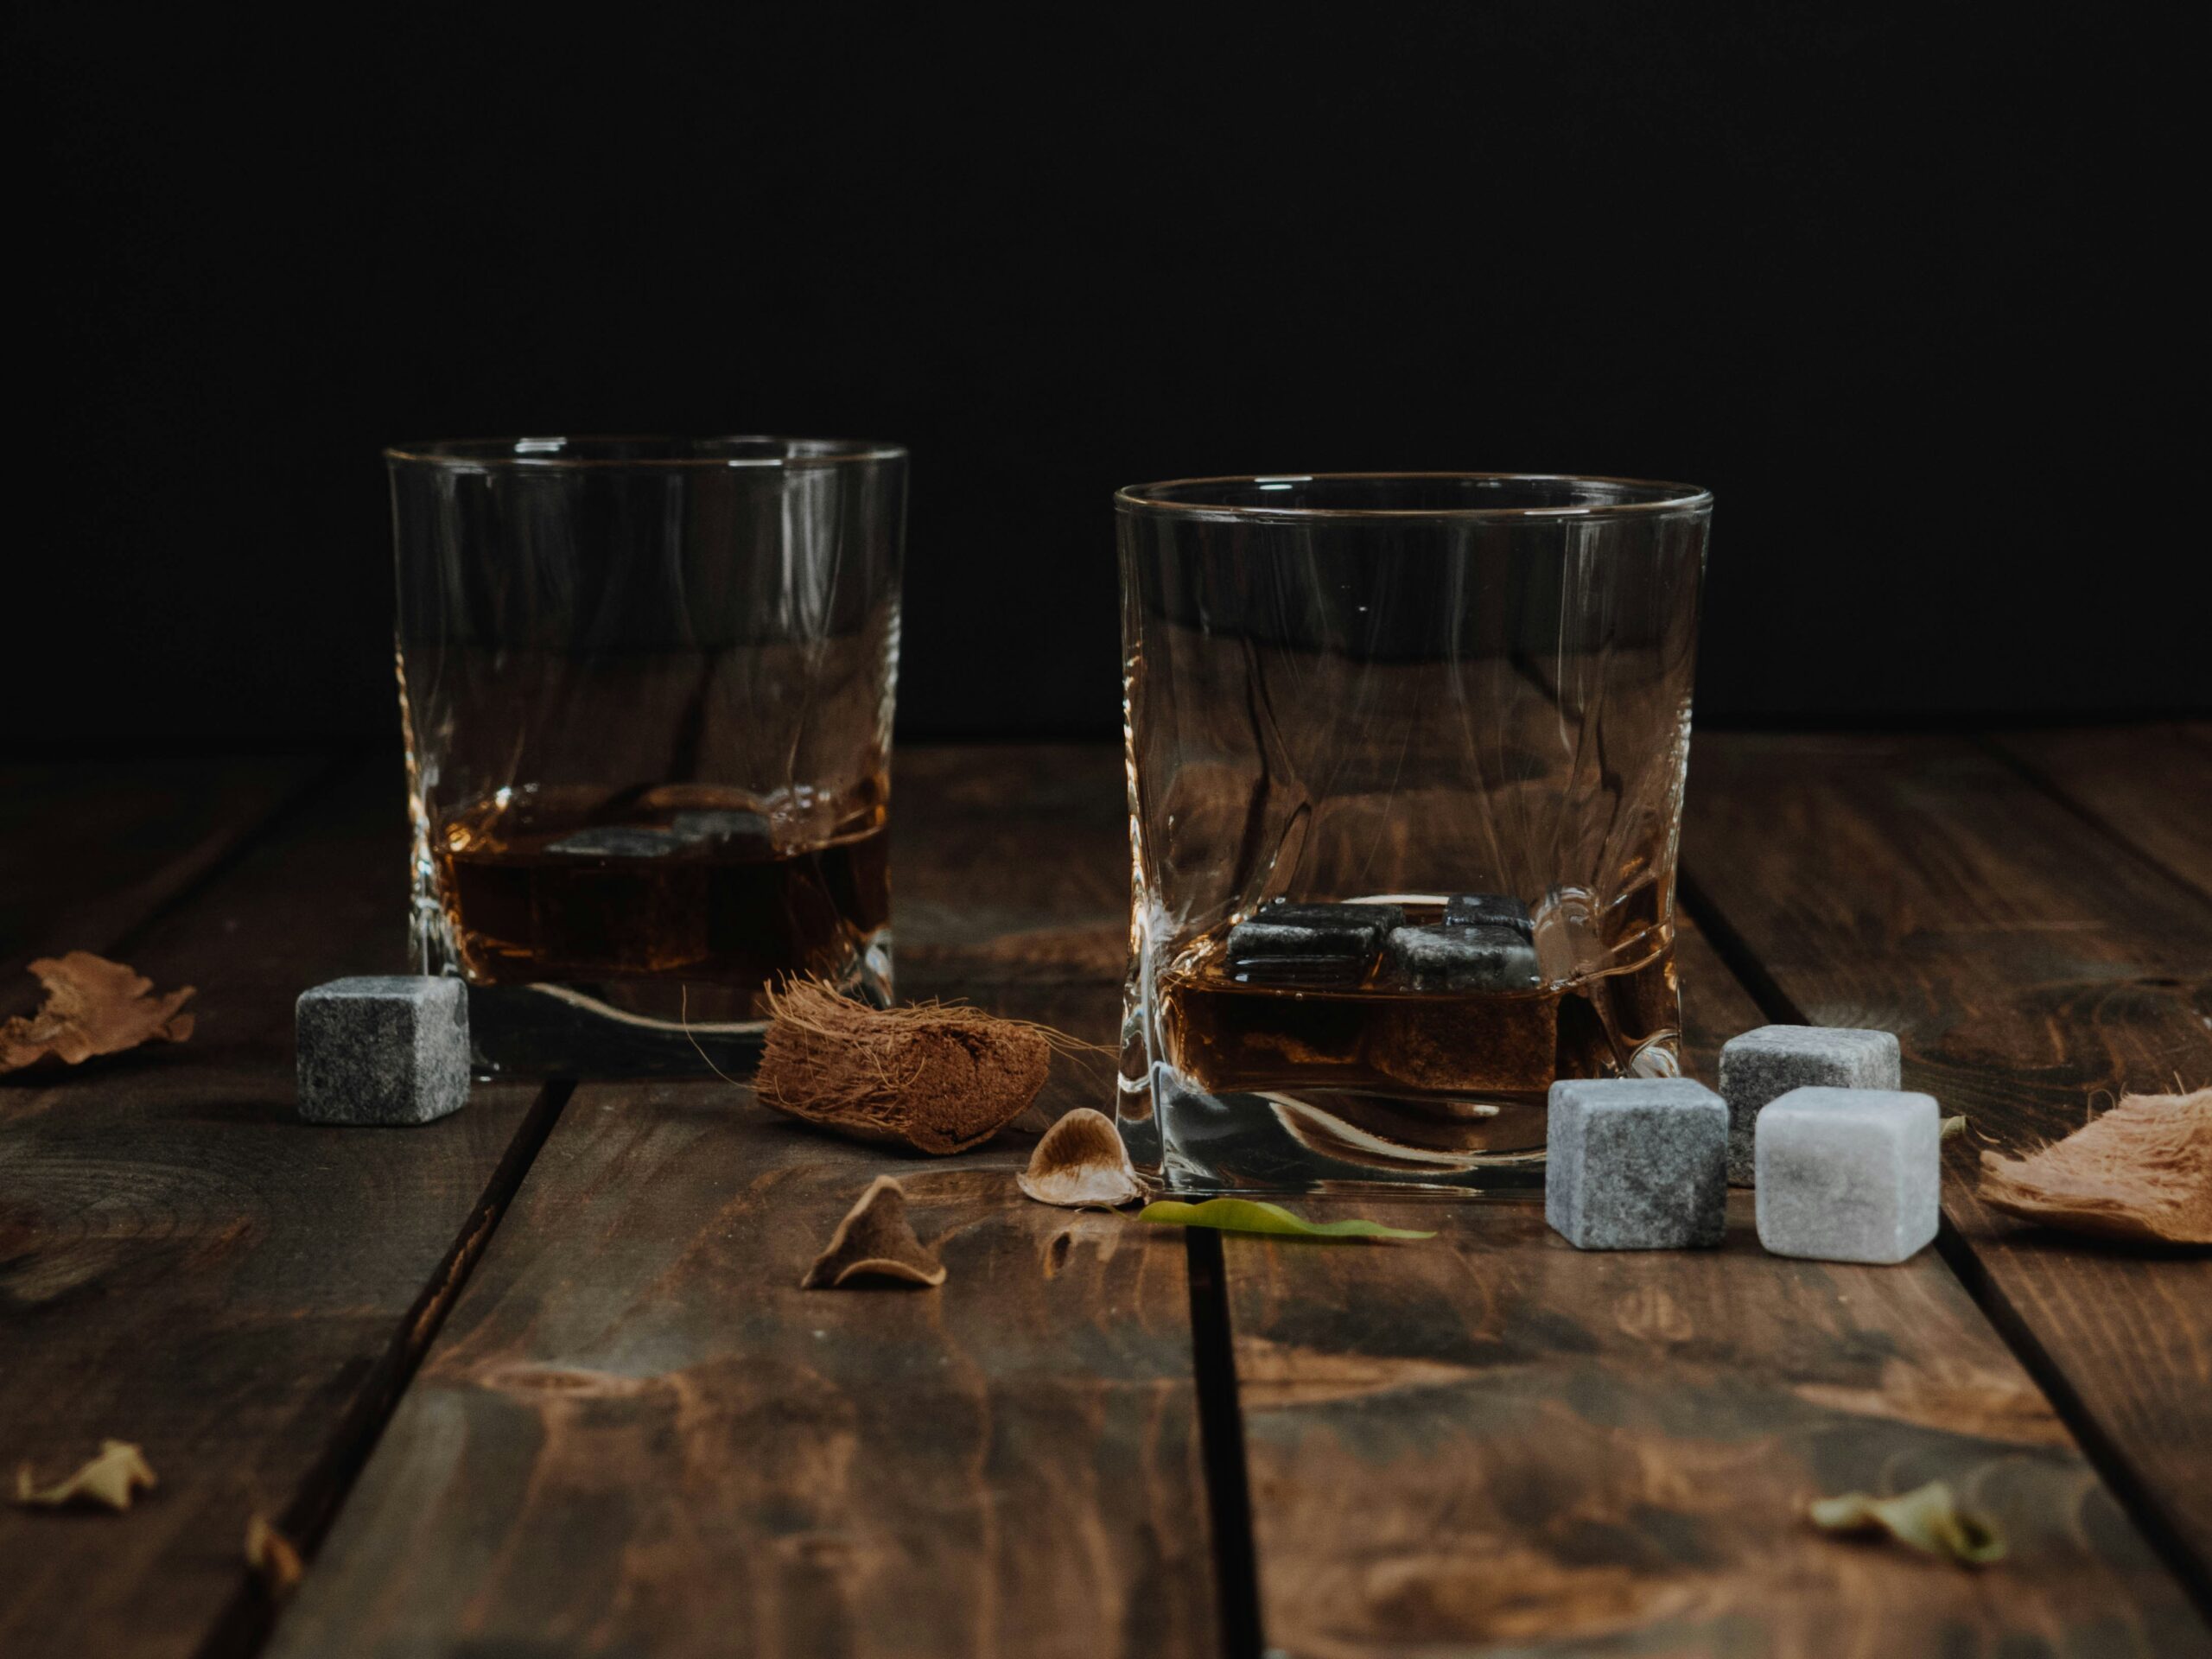 This whiskey distillery offers travelers unique experiences.
pictured: two glasses of whiskey with ice cubes 